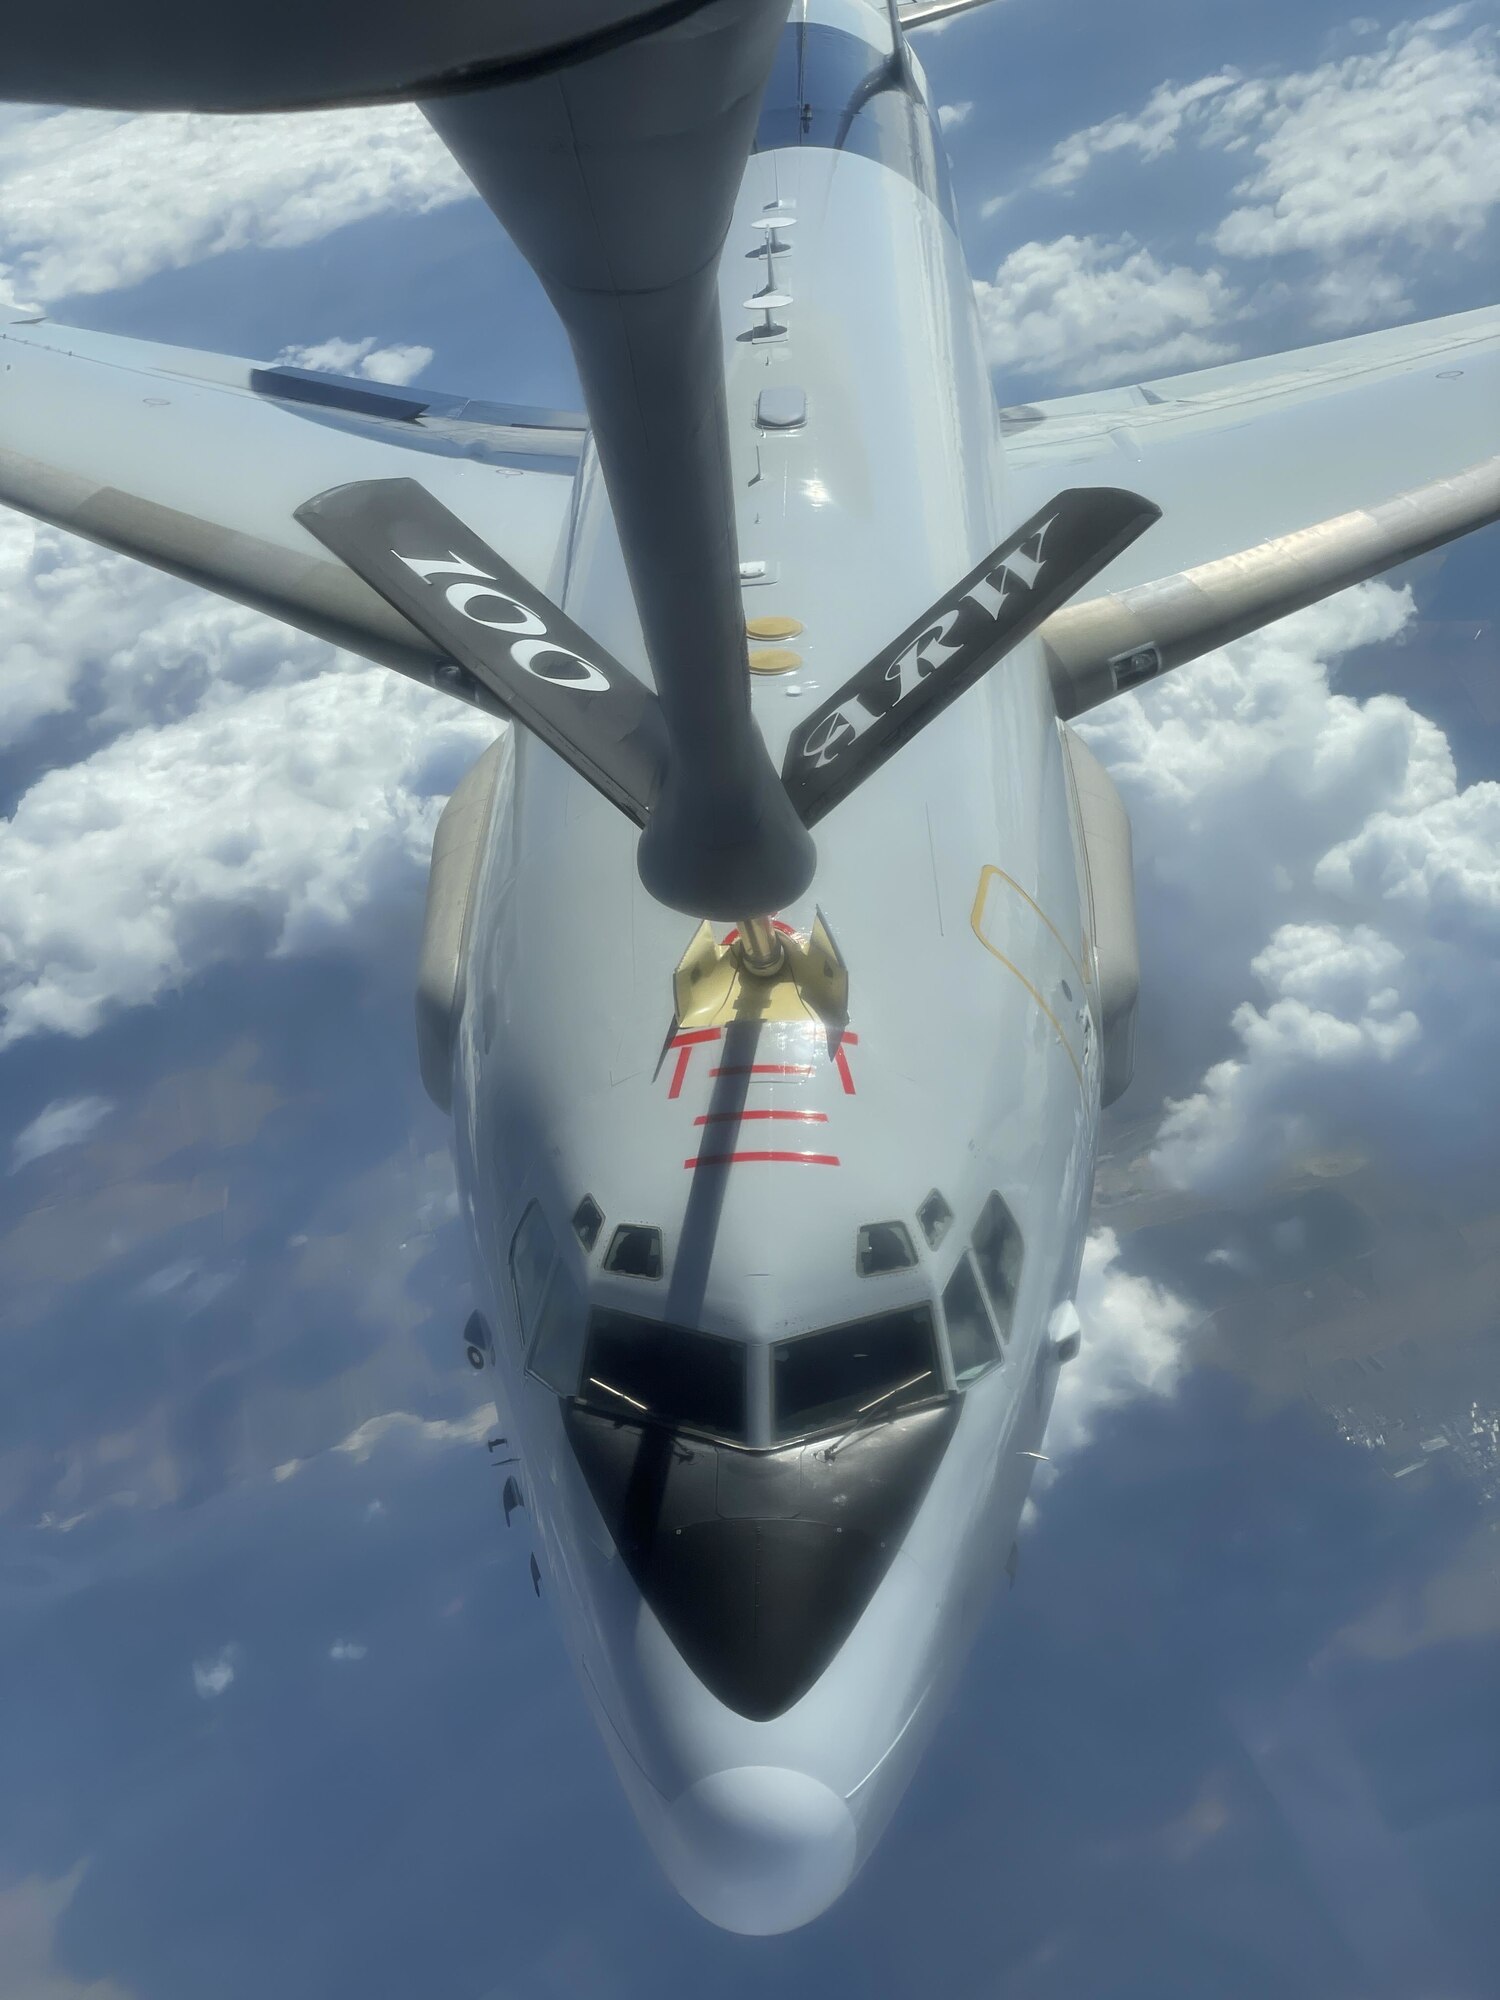 A NATO E-3 Sentry aircraft assigned to Geilenkirchen NATO Air Base, Germany, receives fuel from a U.S. Air Force KC-135 Stratotanker aircraft assigned to the 100th Air Refueling Wing, Royal Air Force Mildenhall, England, over Europe, Aug. 19, 2021. Training with NATO forces enhances the collective security of the European continent. (U.S. Air Force photo by Senior Airman Joseph Barron)